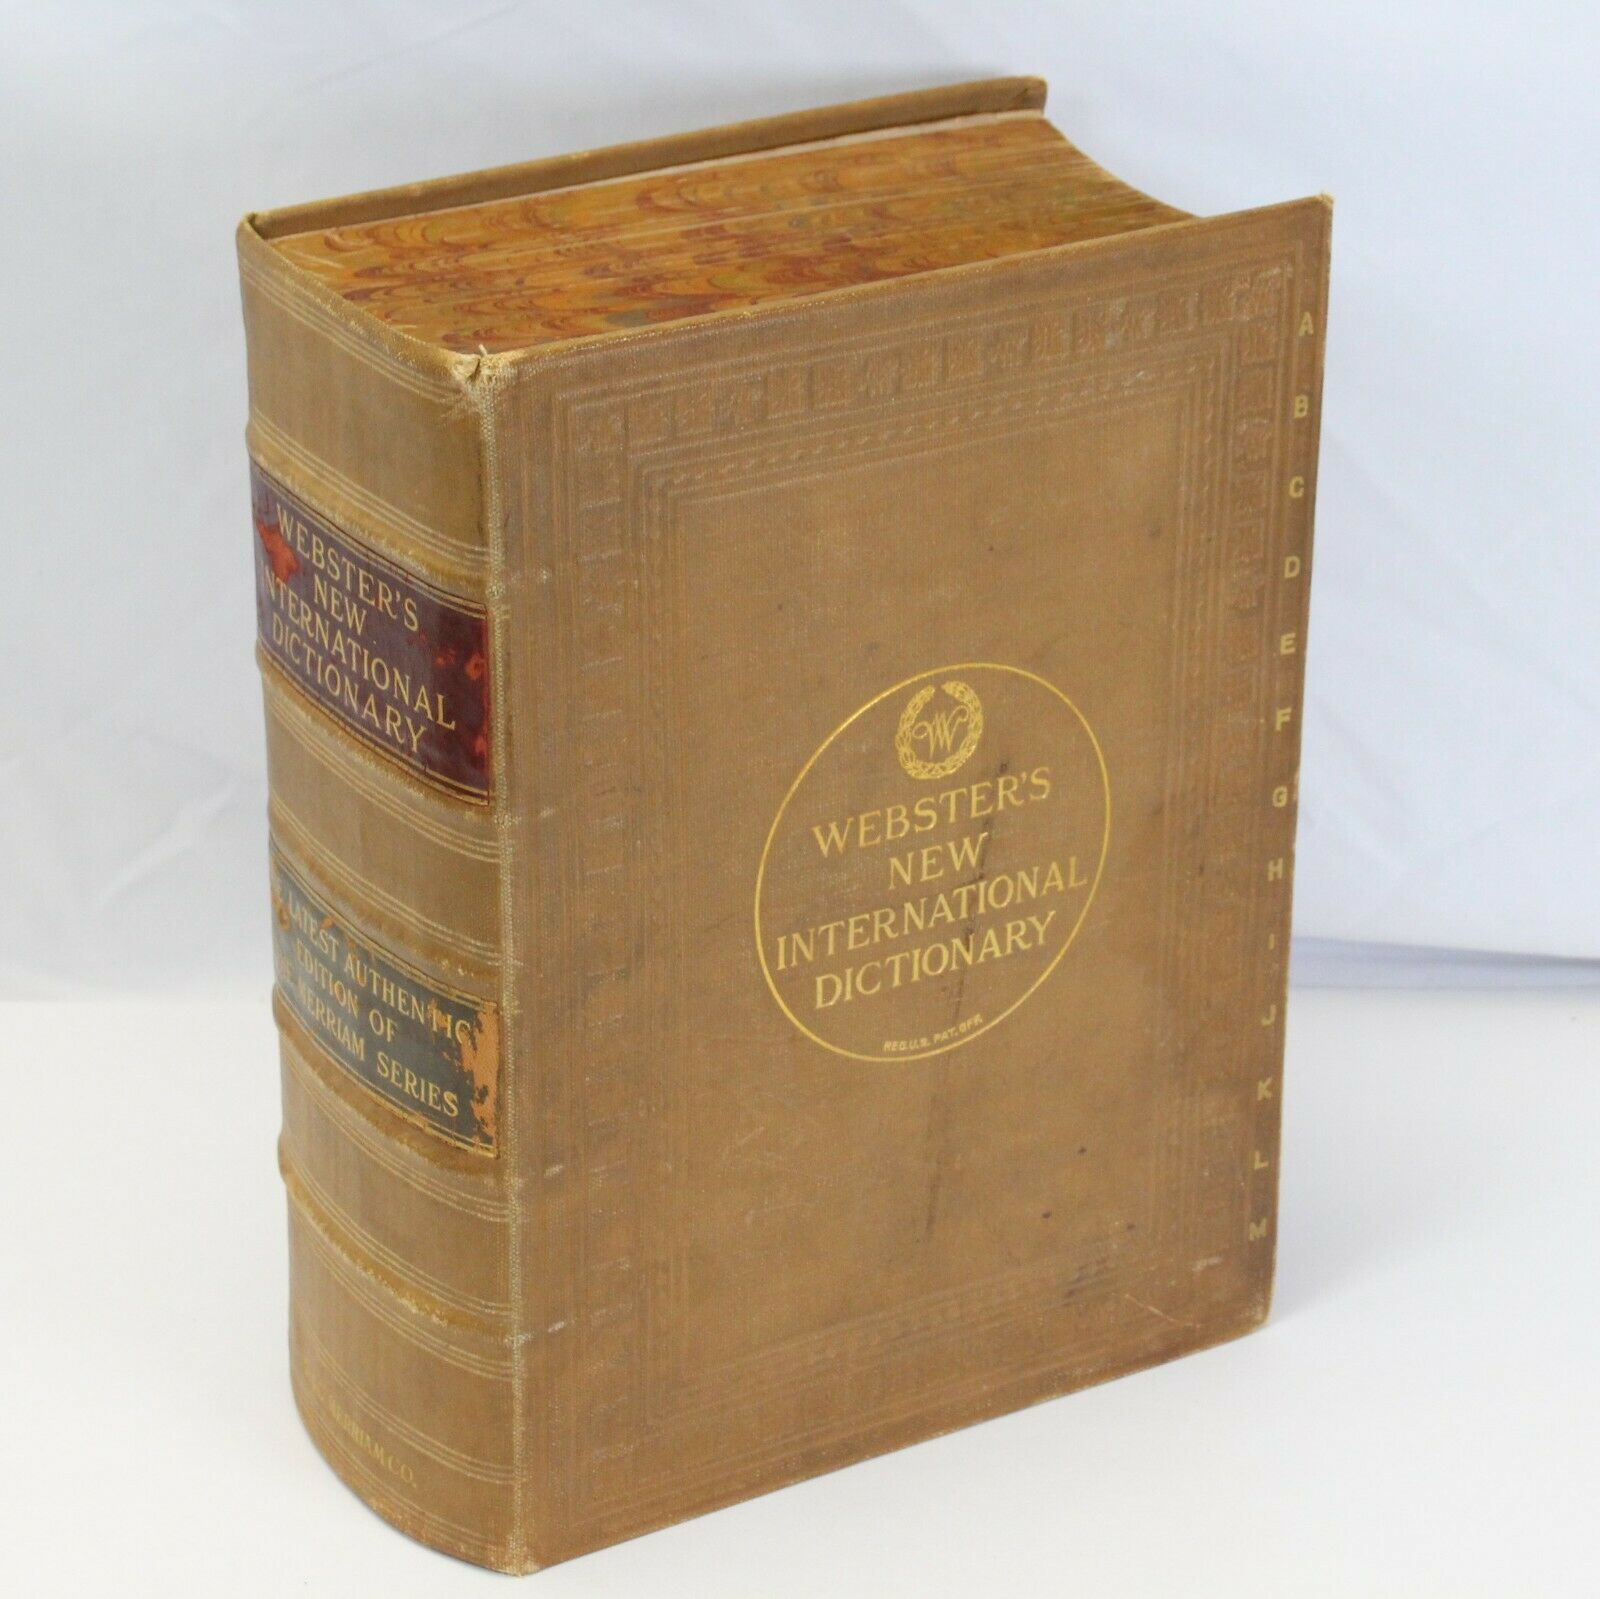 1930 Webster's New International Dictionary and 50 similar items